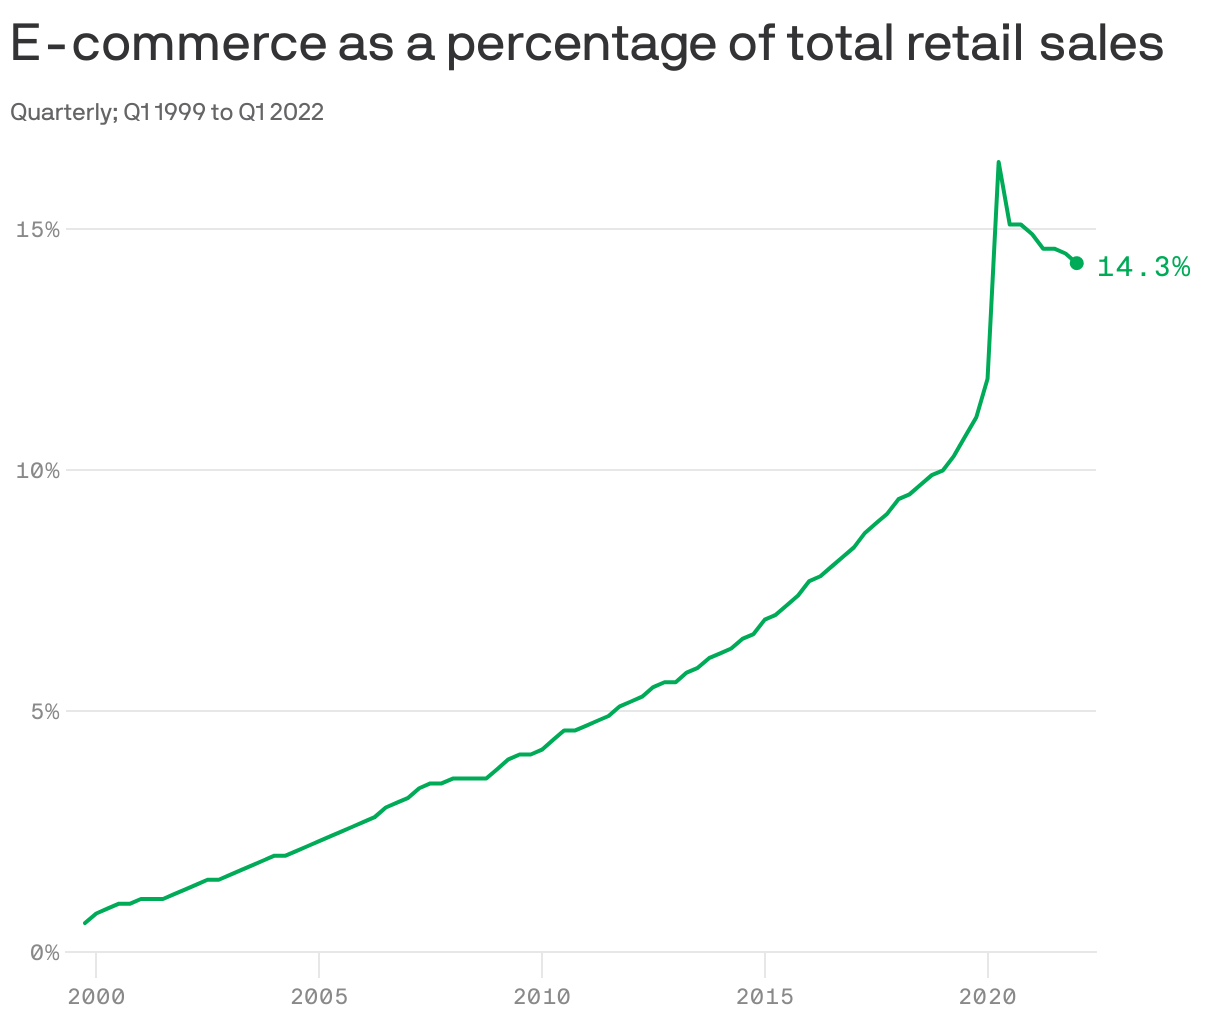 E-commerce as a percentage of total retail&nbspsales